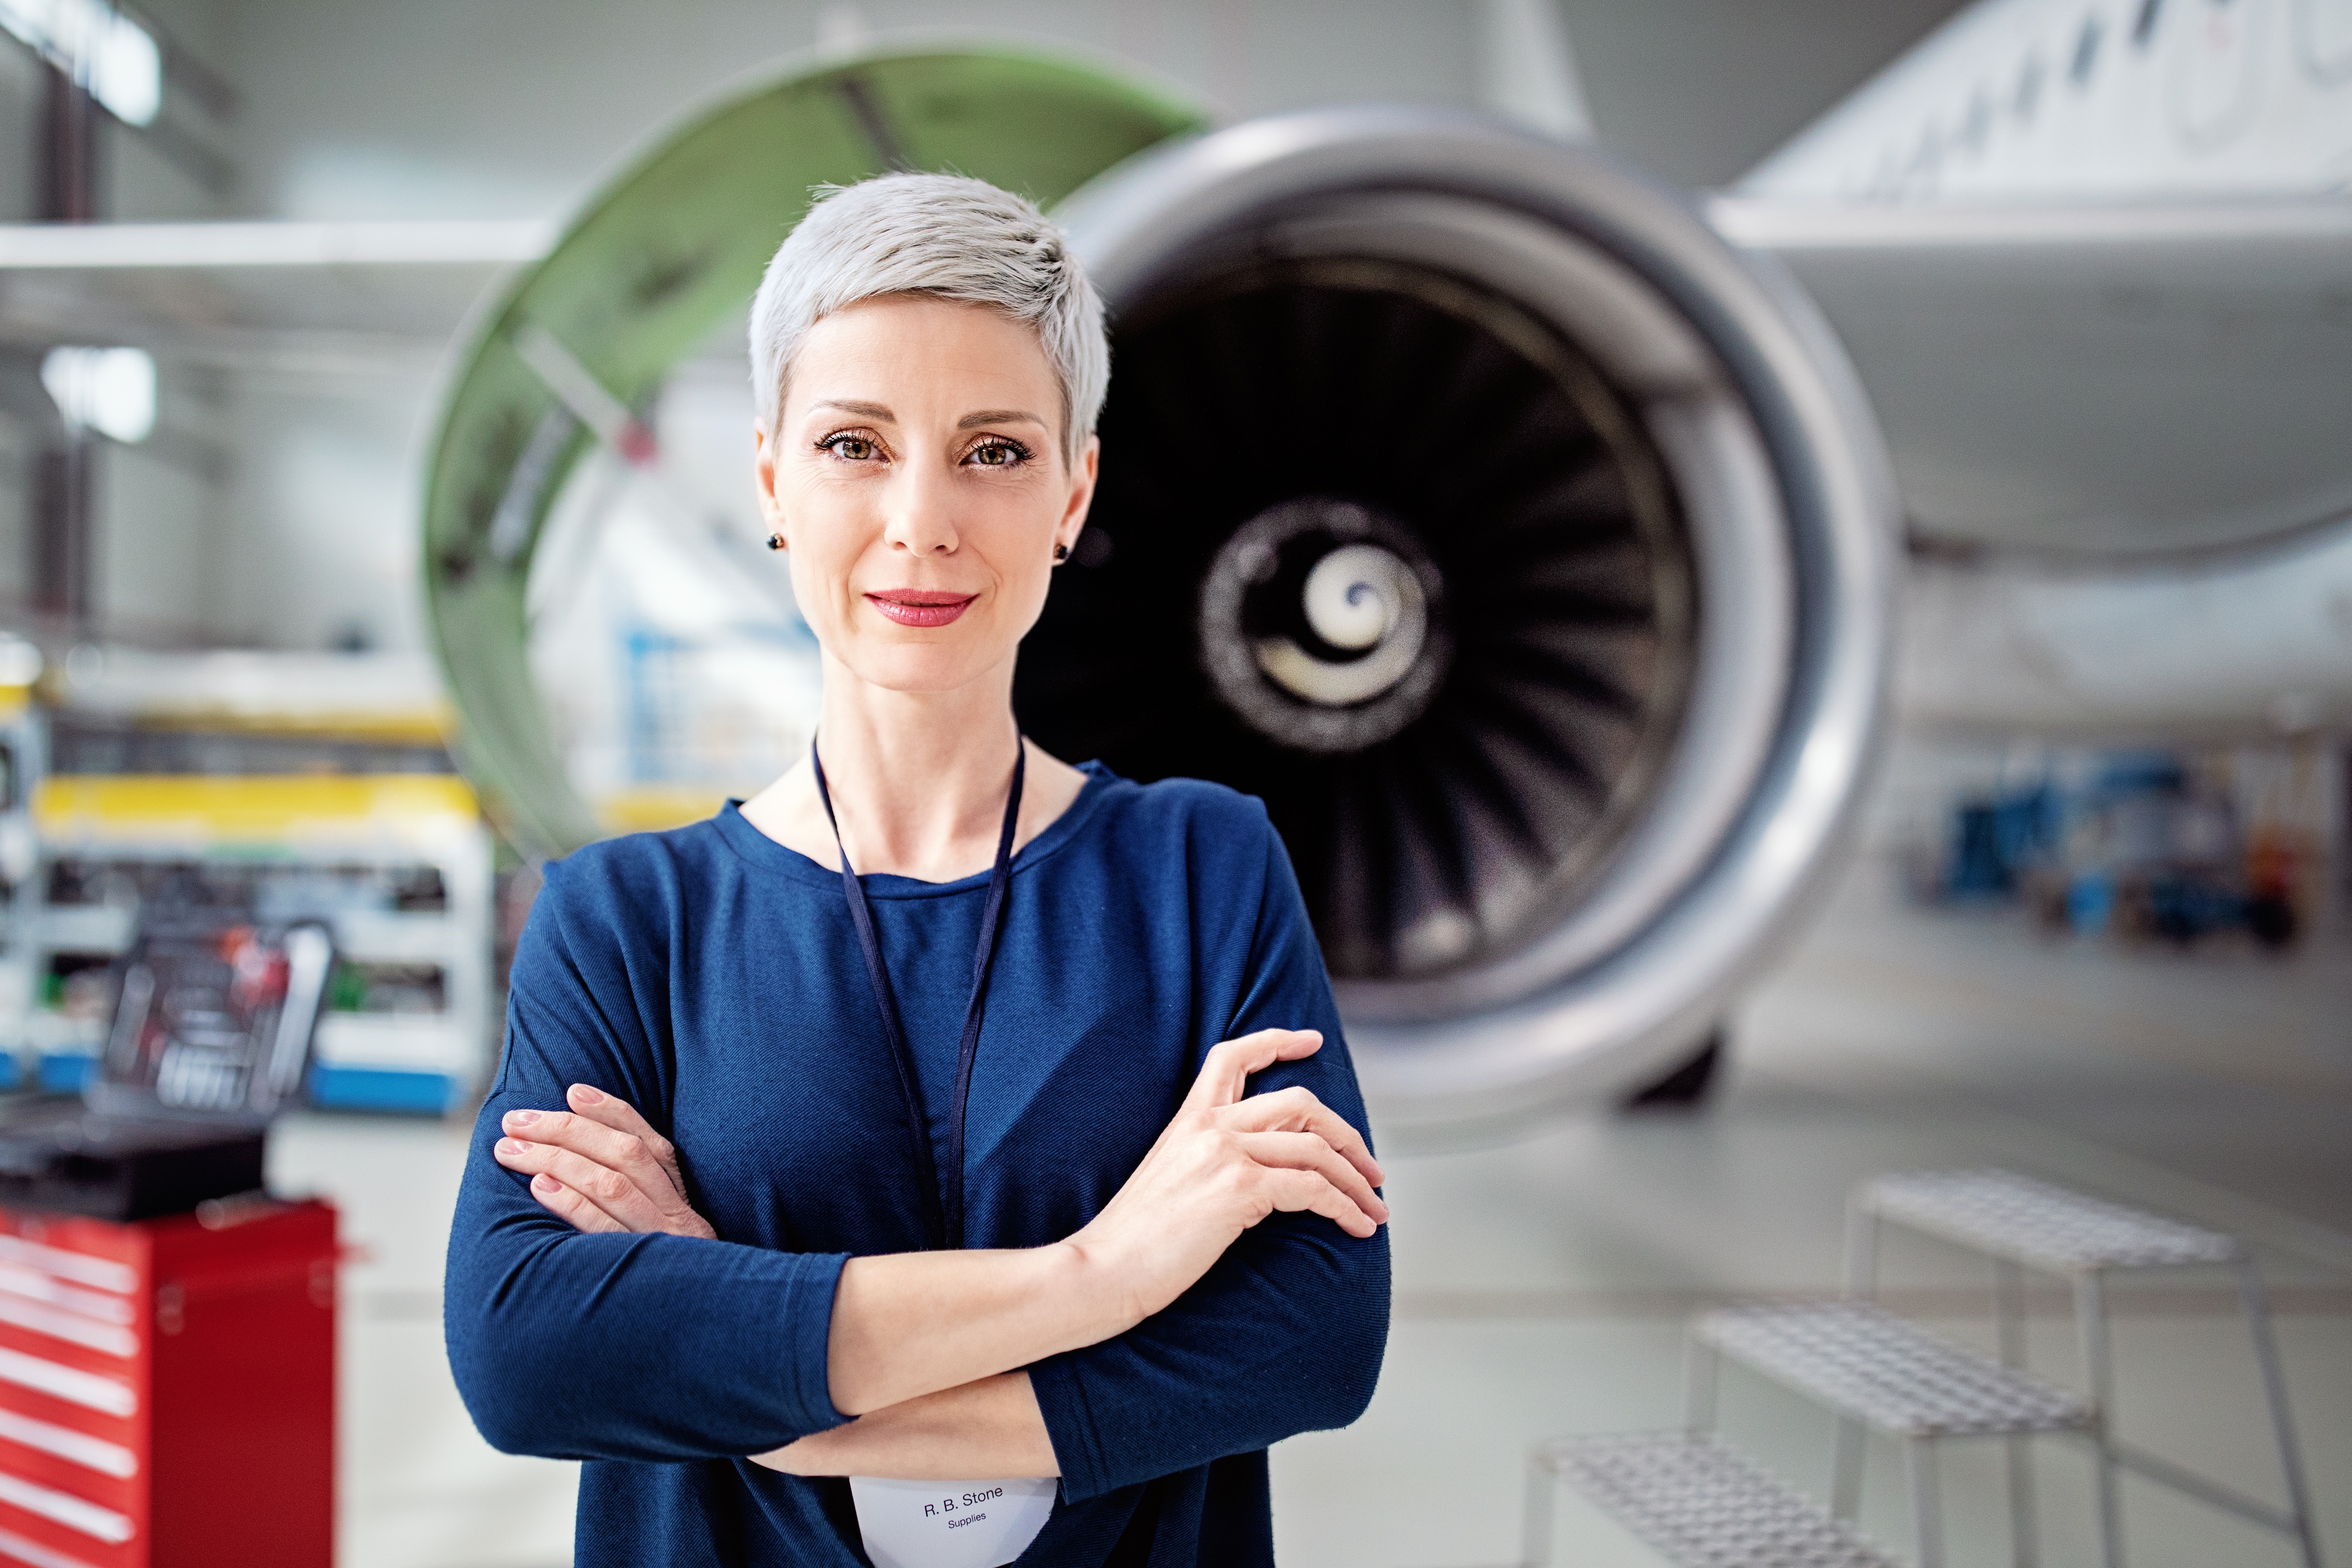 An aerospace worker stands in front of an airplane with arms crossed